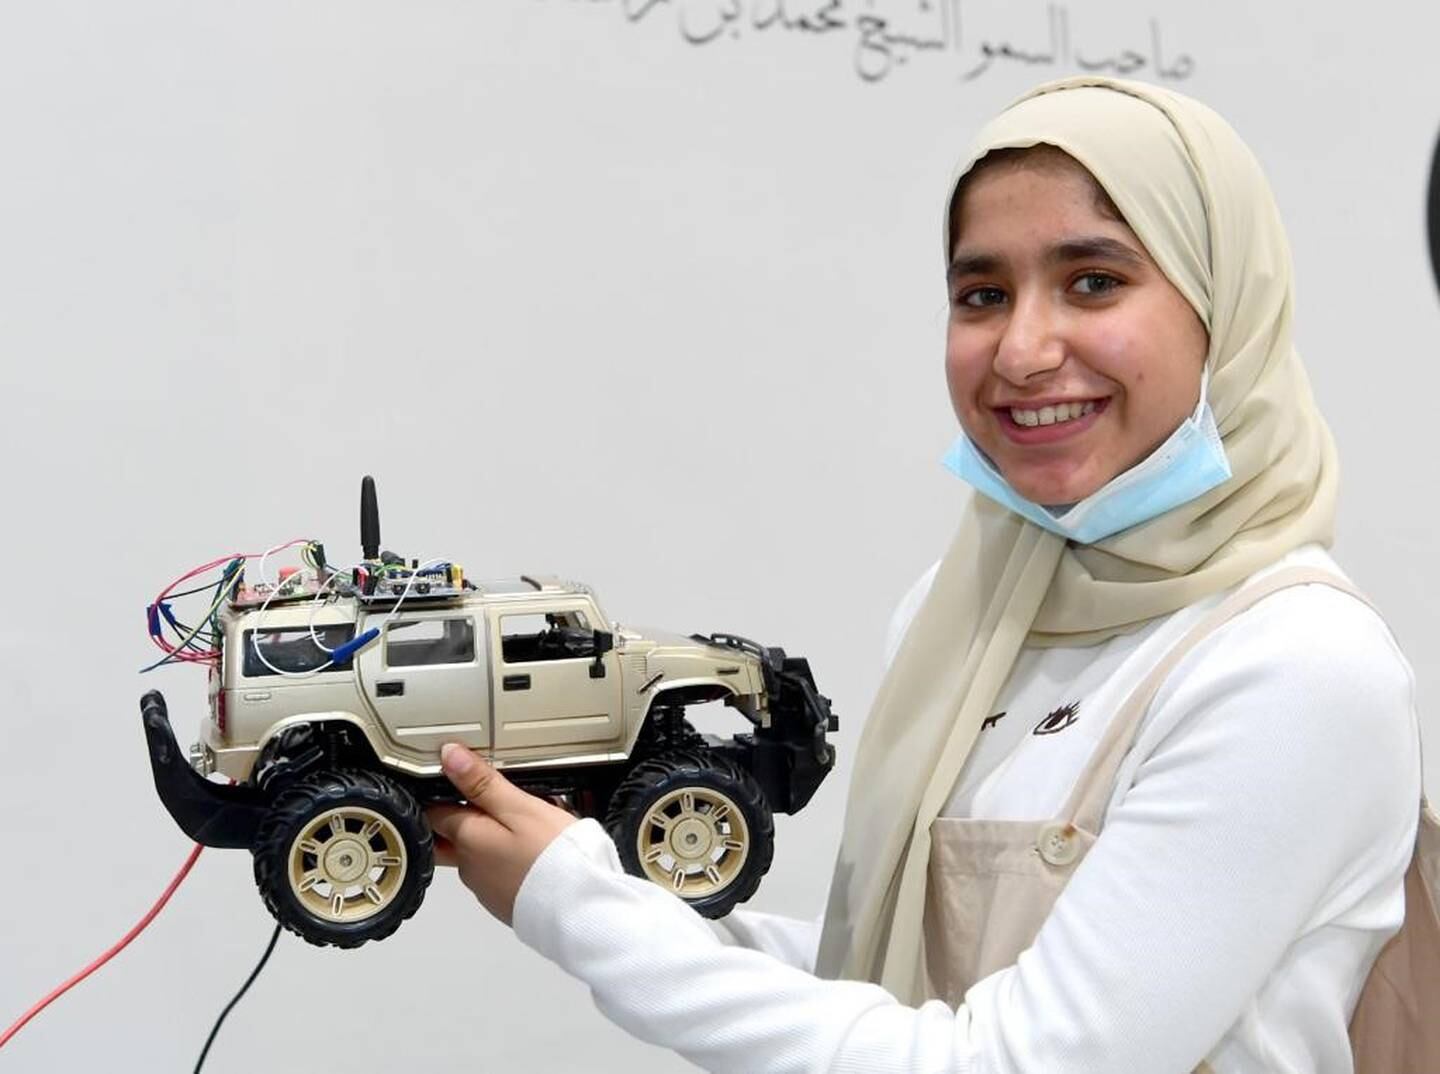 Young inventor Mariam Al Ghafri has more than two dozens inventions with the aim of making everyday life better. Photo: Mariam Al Ghafri